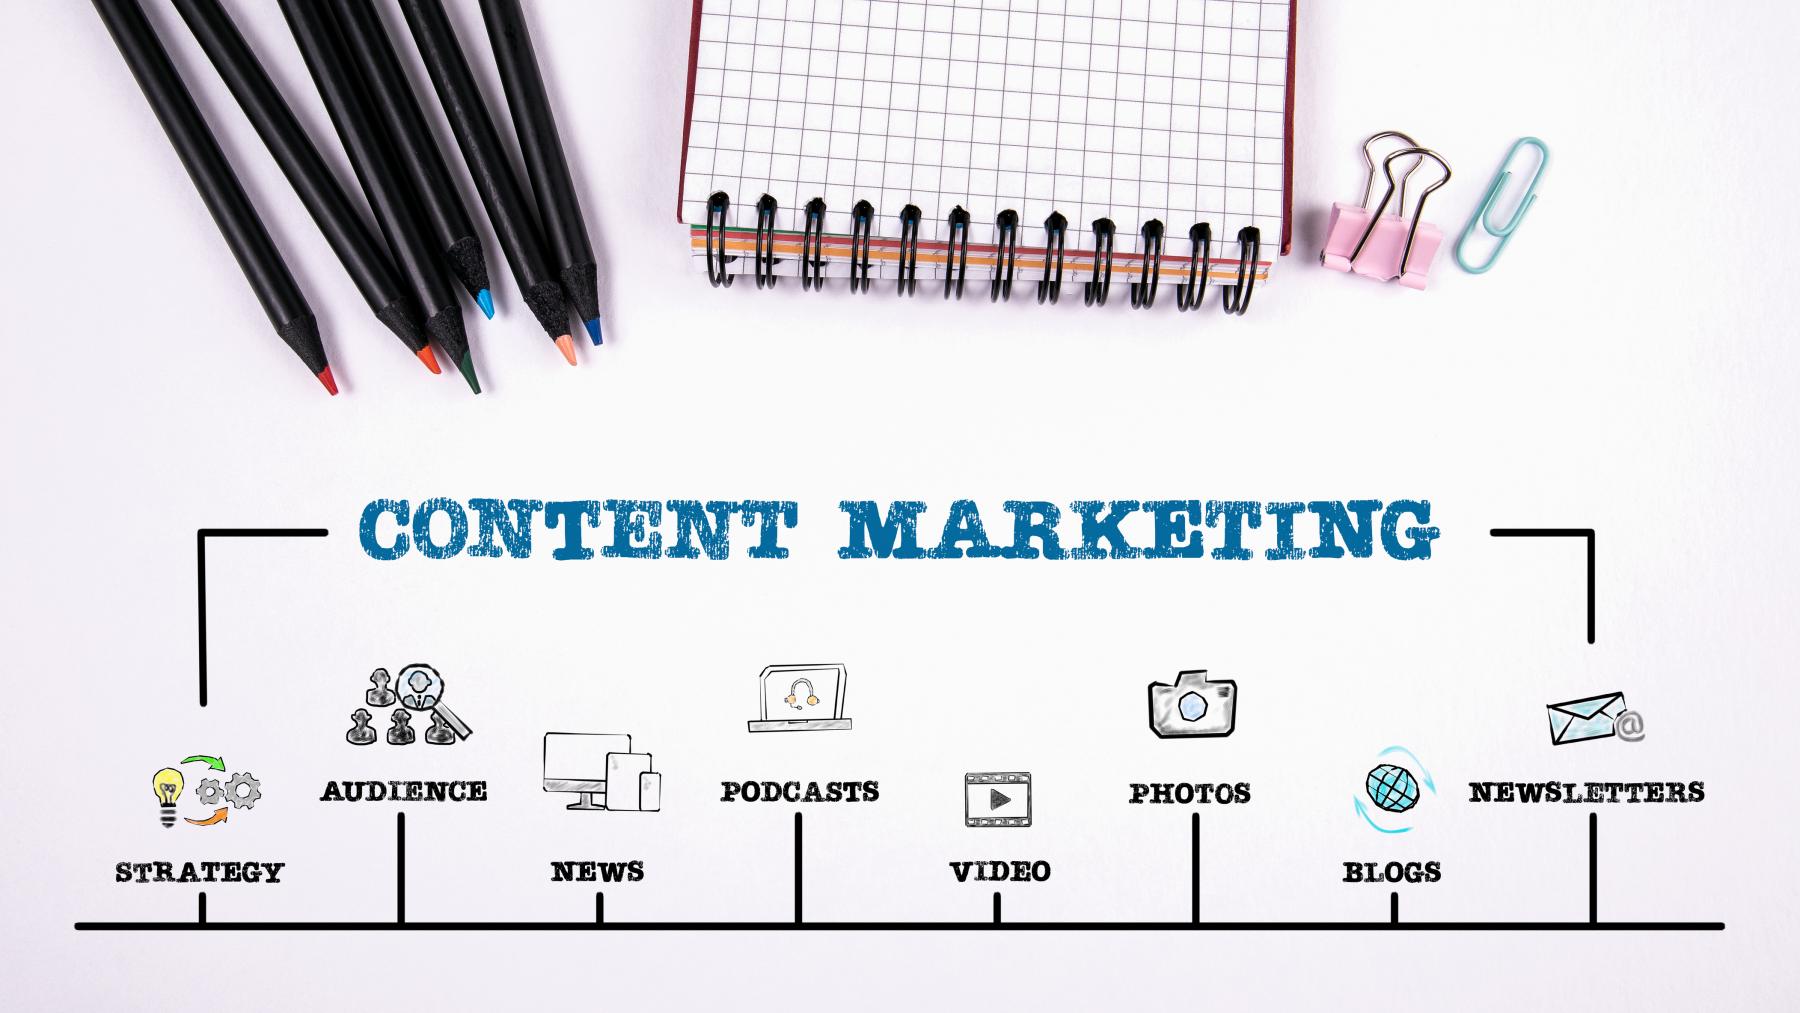 What Are the Benefits of Right Content Marketing?